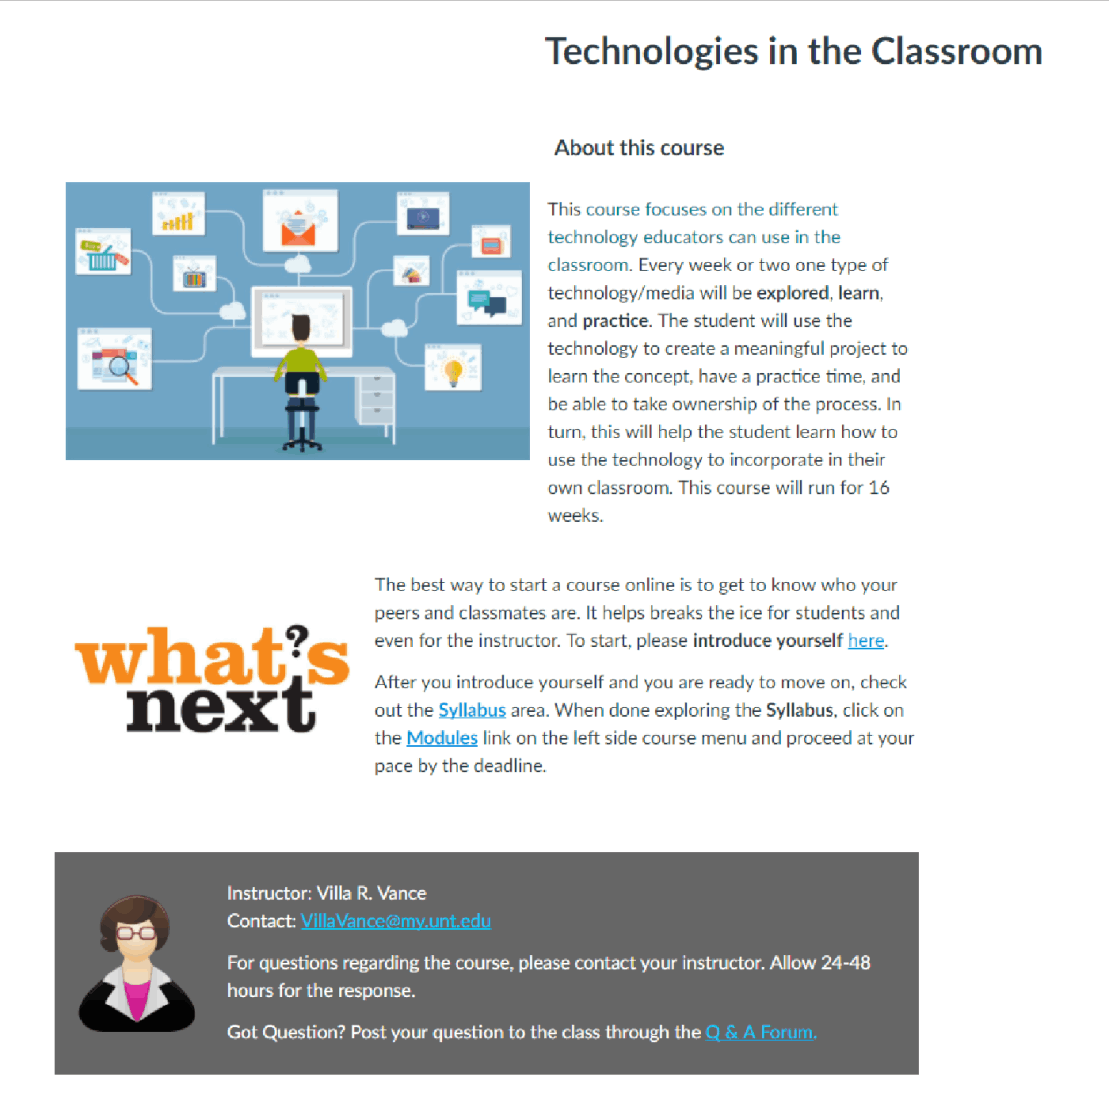 Technologies in the Classrom